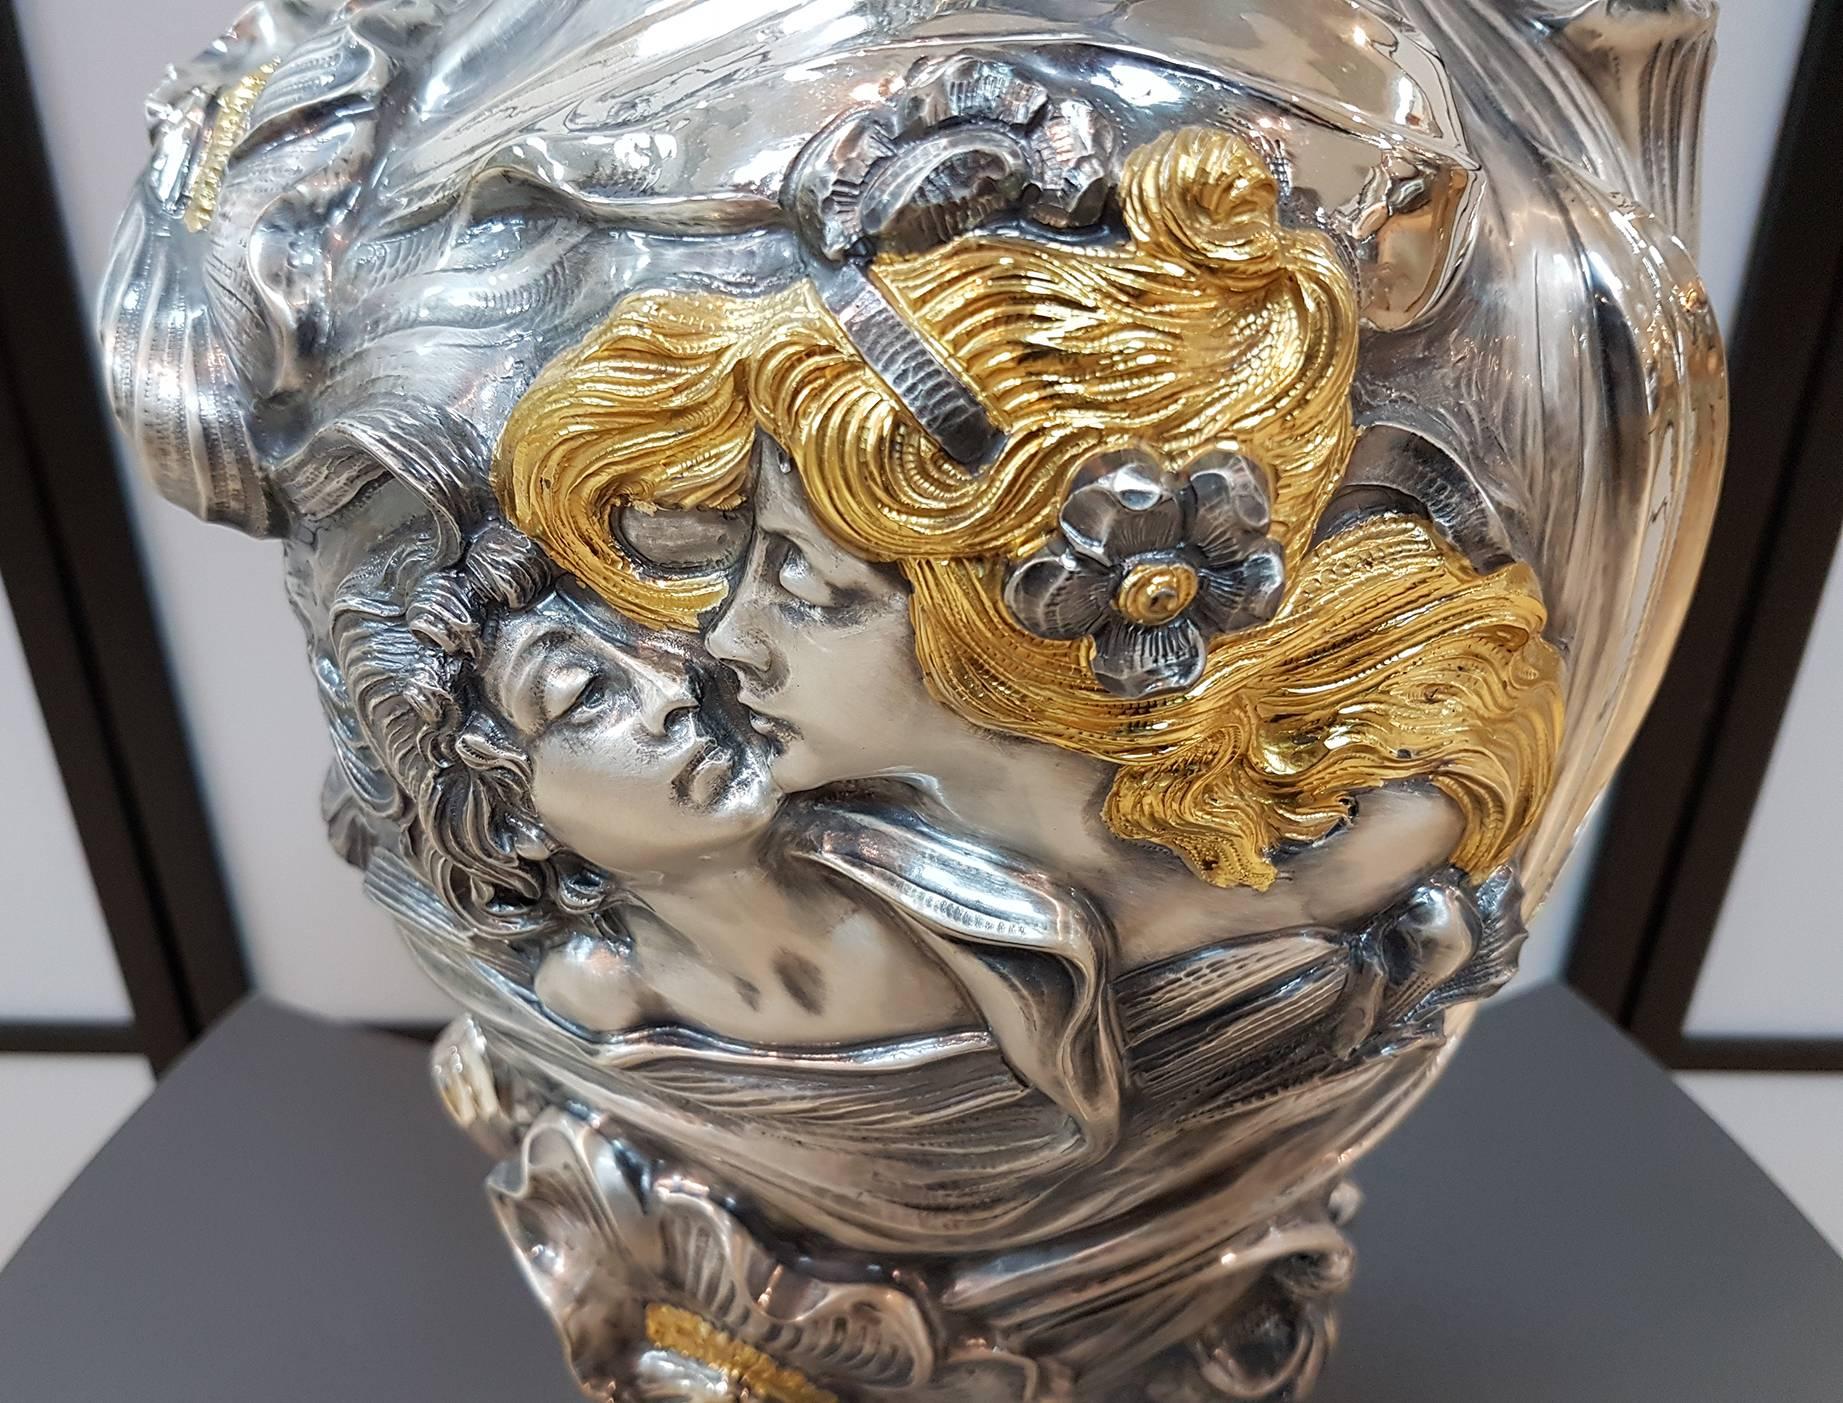 This Art Nouveau vase displays particularly beautiful embossing which allows the harmonious creation of the figures of two young women at the front of the vase and two more at the back, surrounded by leaves and flowers.
The relief elements stand